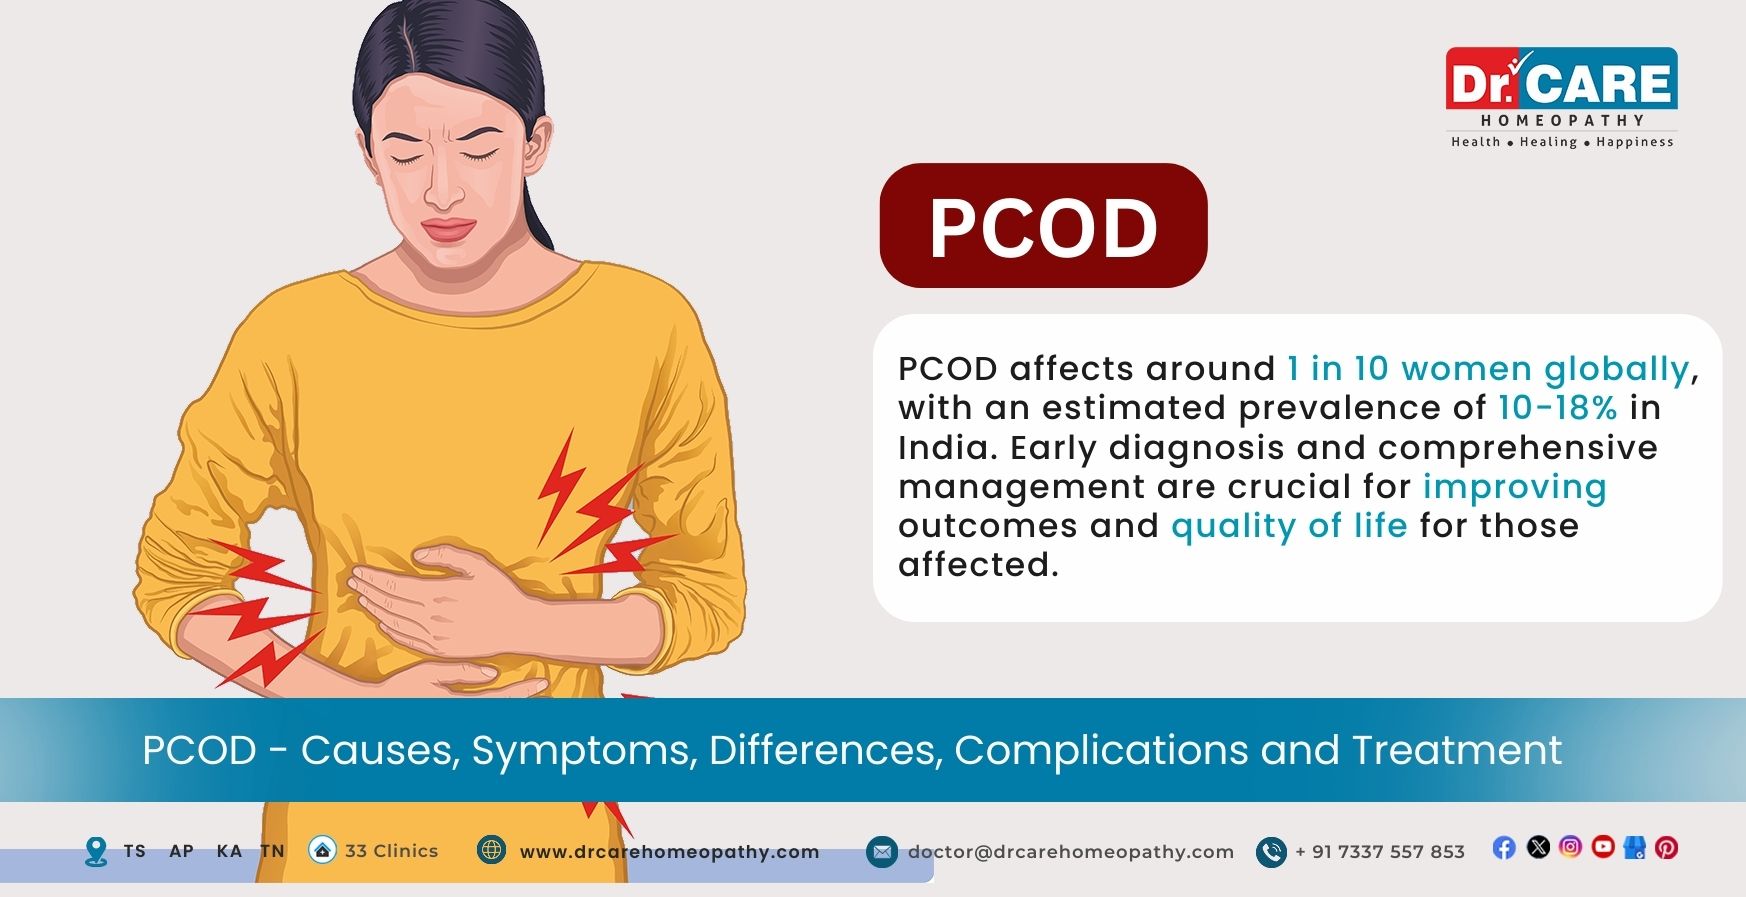 PCOD (Polycystic Ovarian Disease) – Symptoms, Causes, Differences, Complications and Treatment